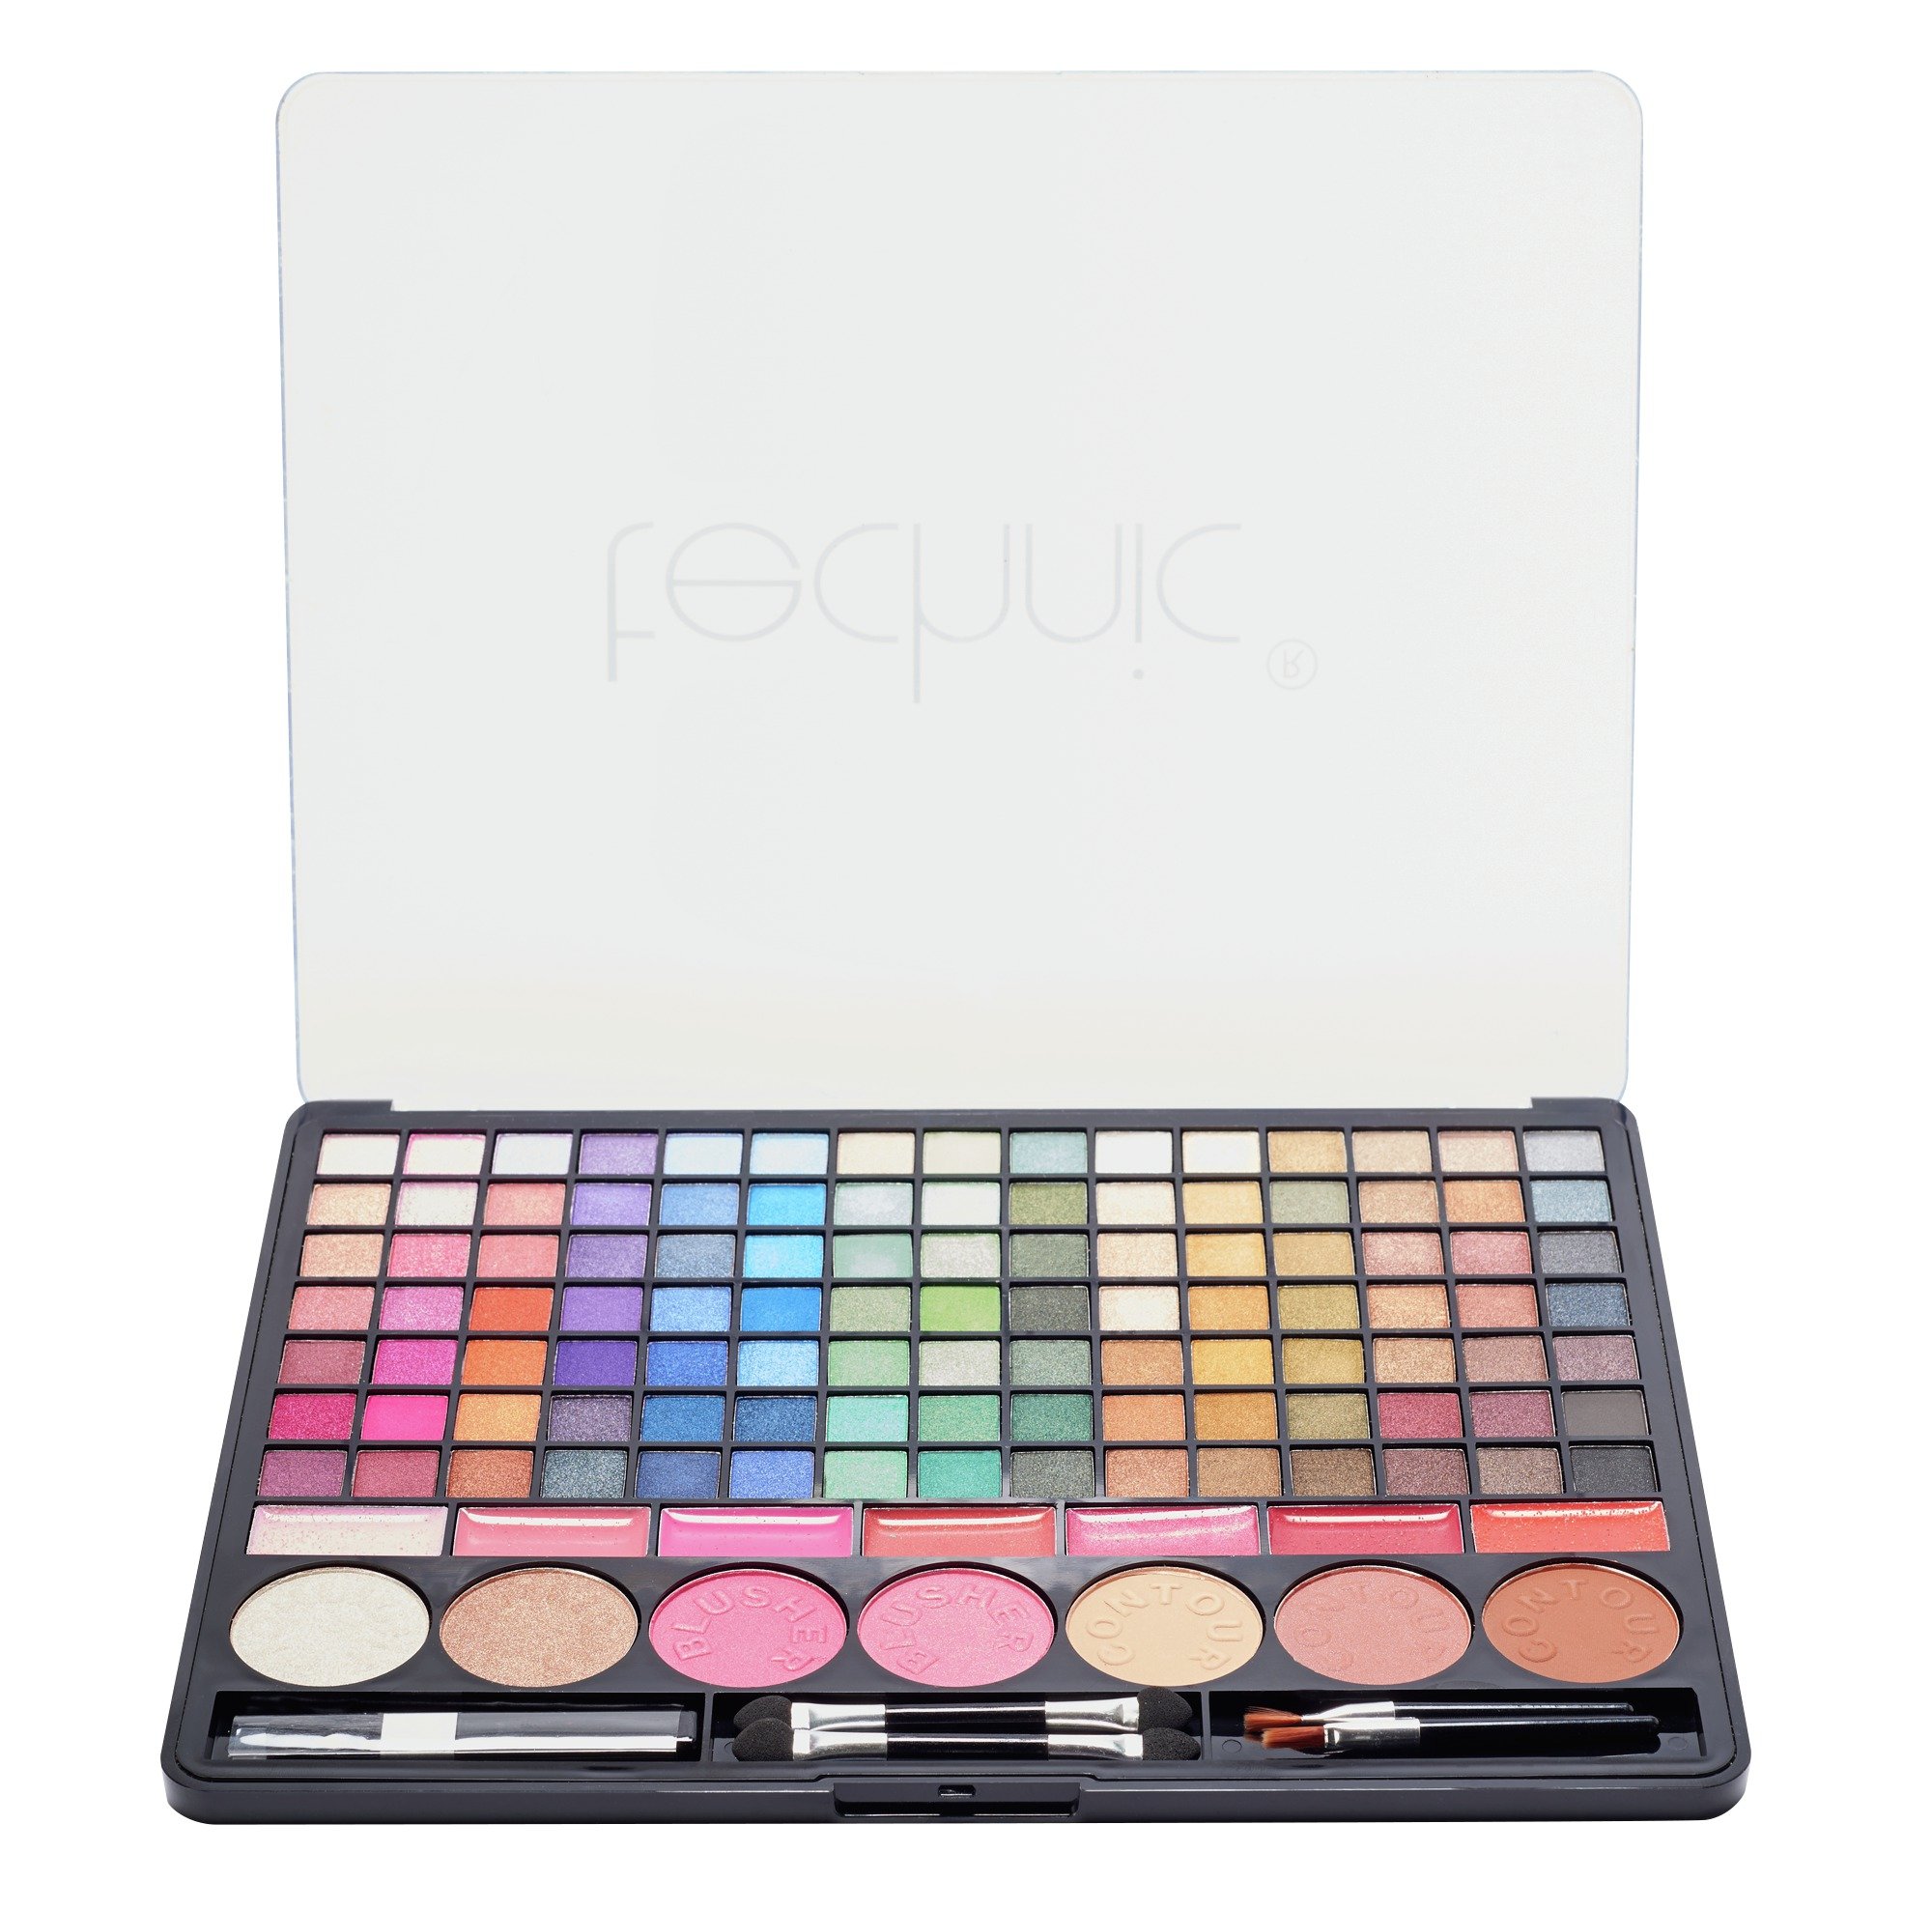 Technic Large Wow Factor Make-up Palette